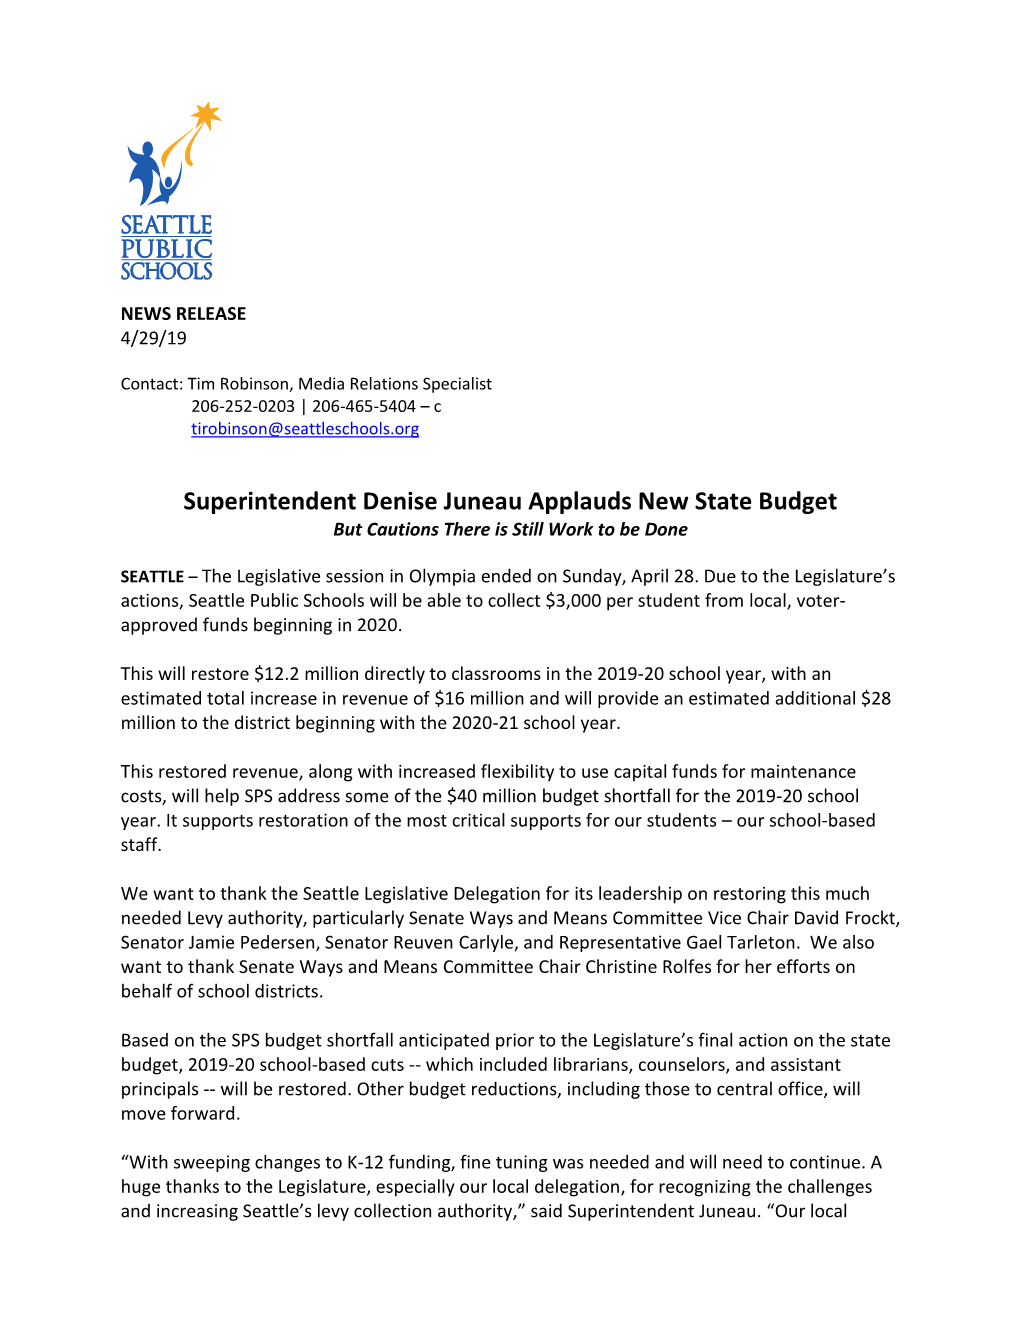 Superintendent Denise Juneau Applauds New State Budget but Cautions There Is Still Work to Be Done